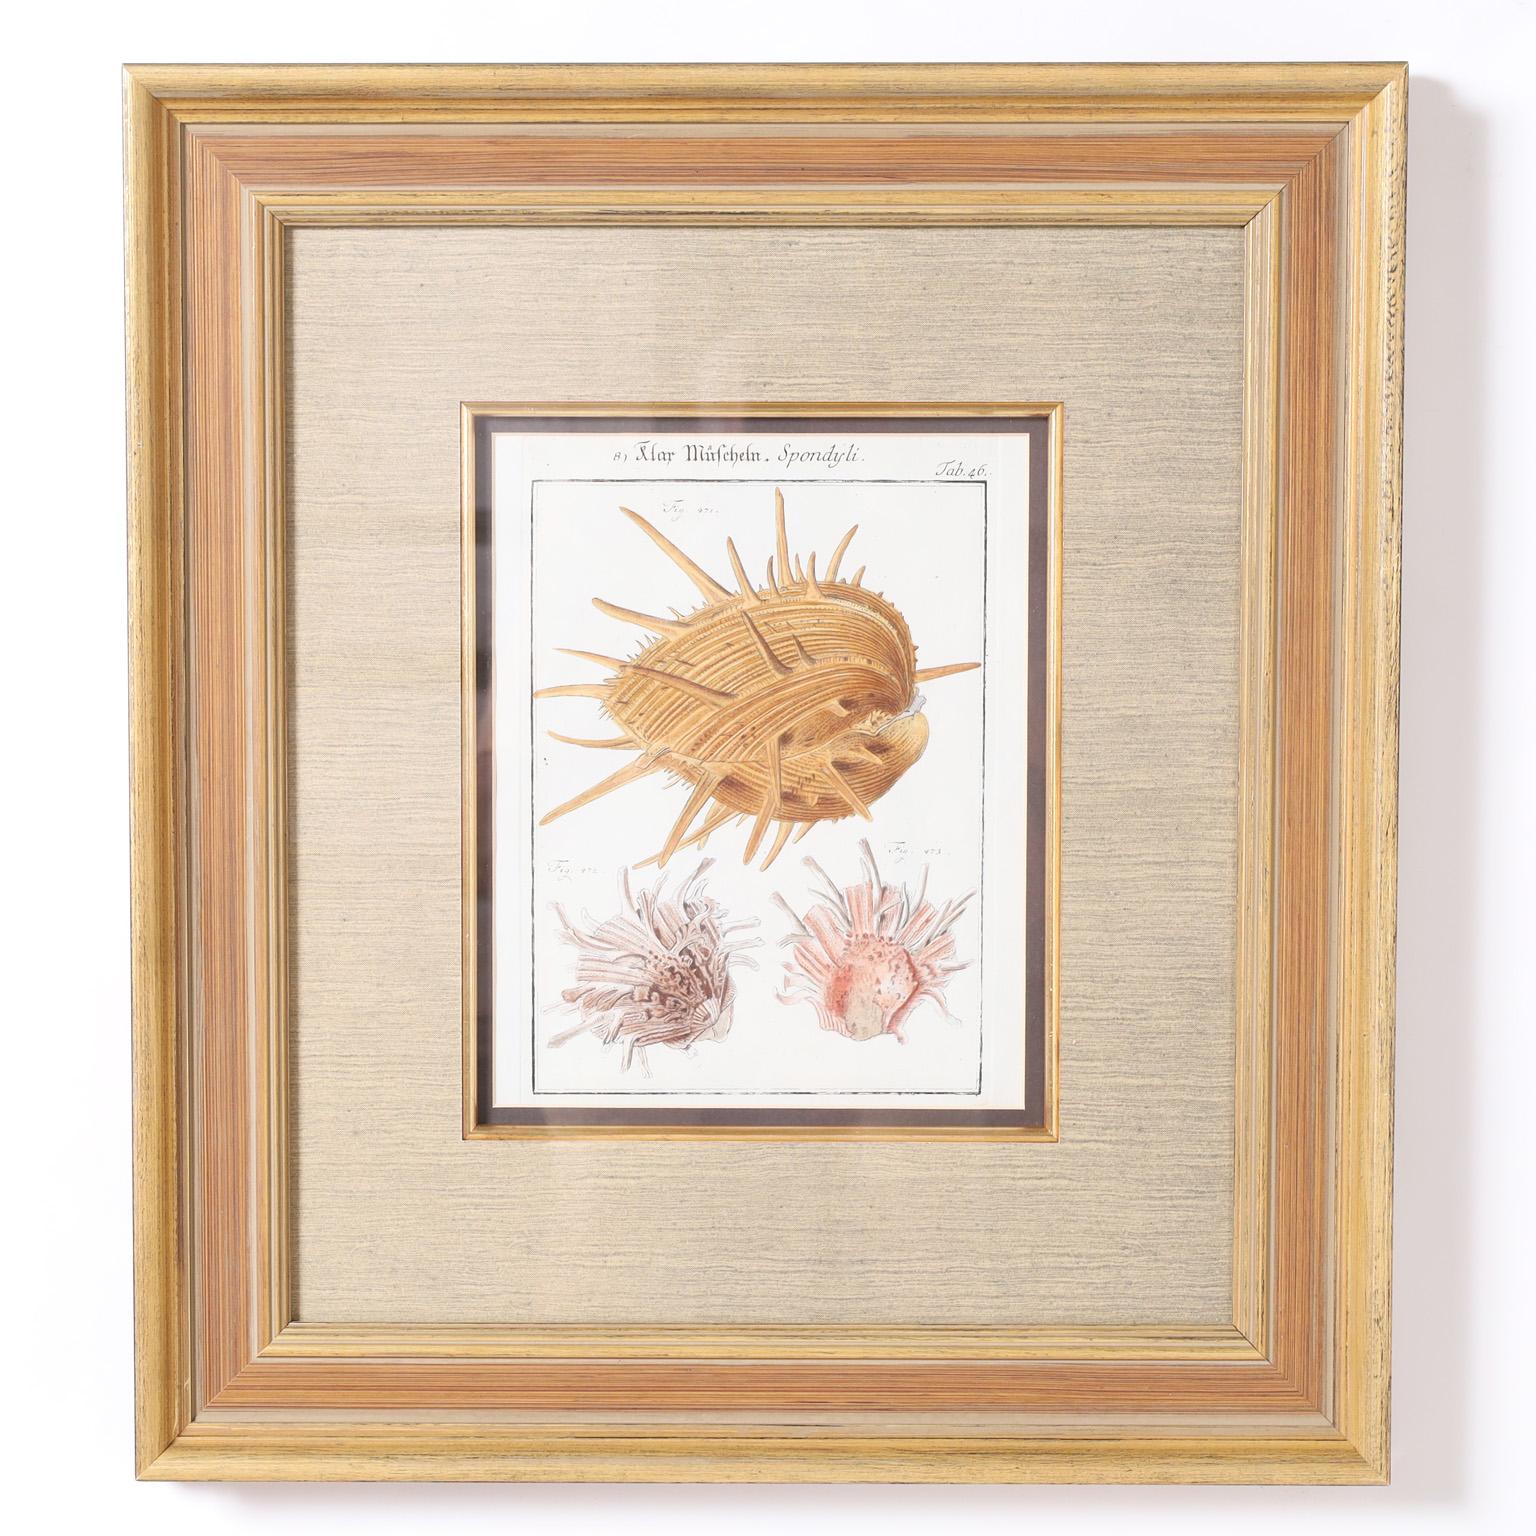 Historic set of three 18th century engravings hand painted in watercolor depicting seashell specimens in an early naturalist style. Presented under glass in wood frames.